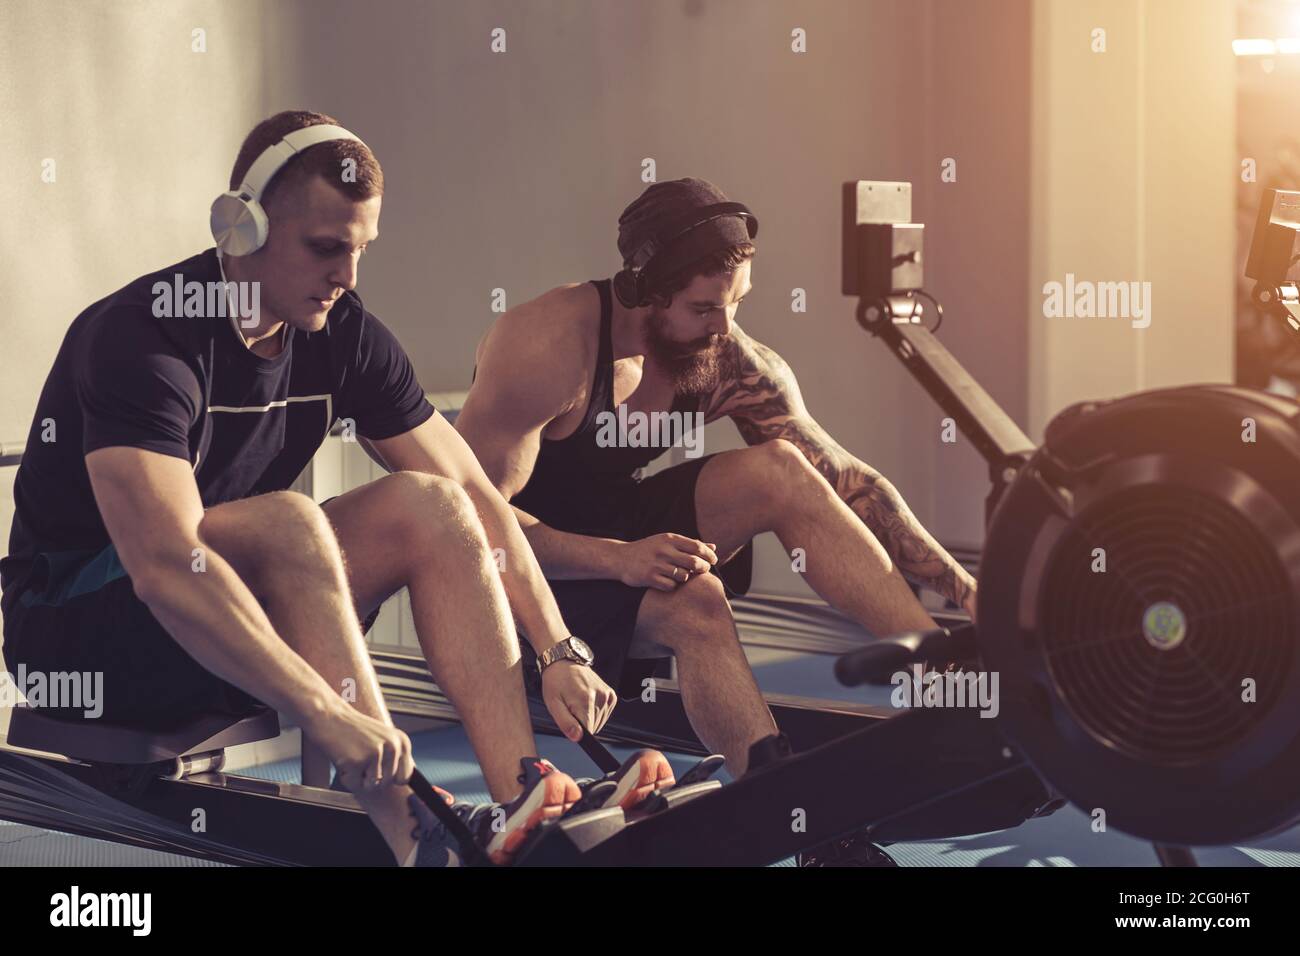 Side view of man and woman doing exercises with rowing machine at gym. Stock Photo